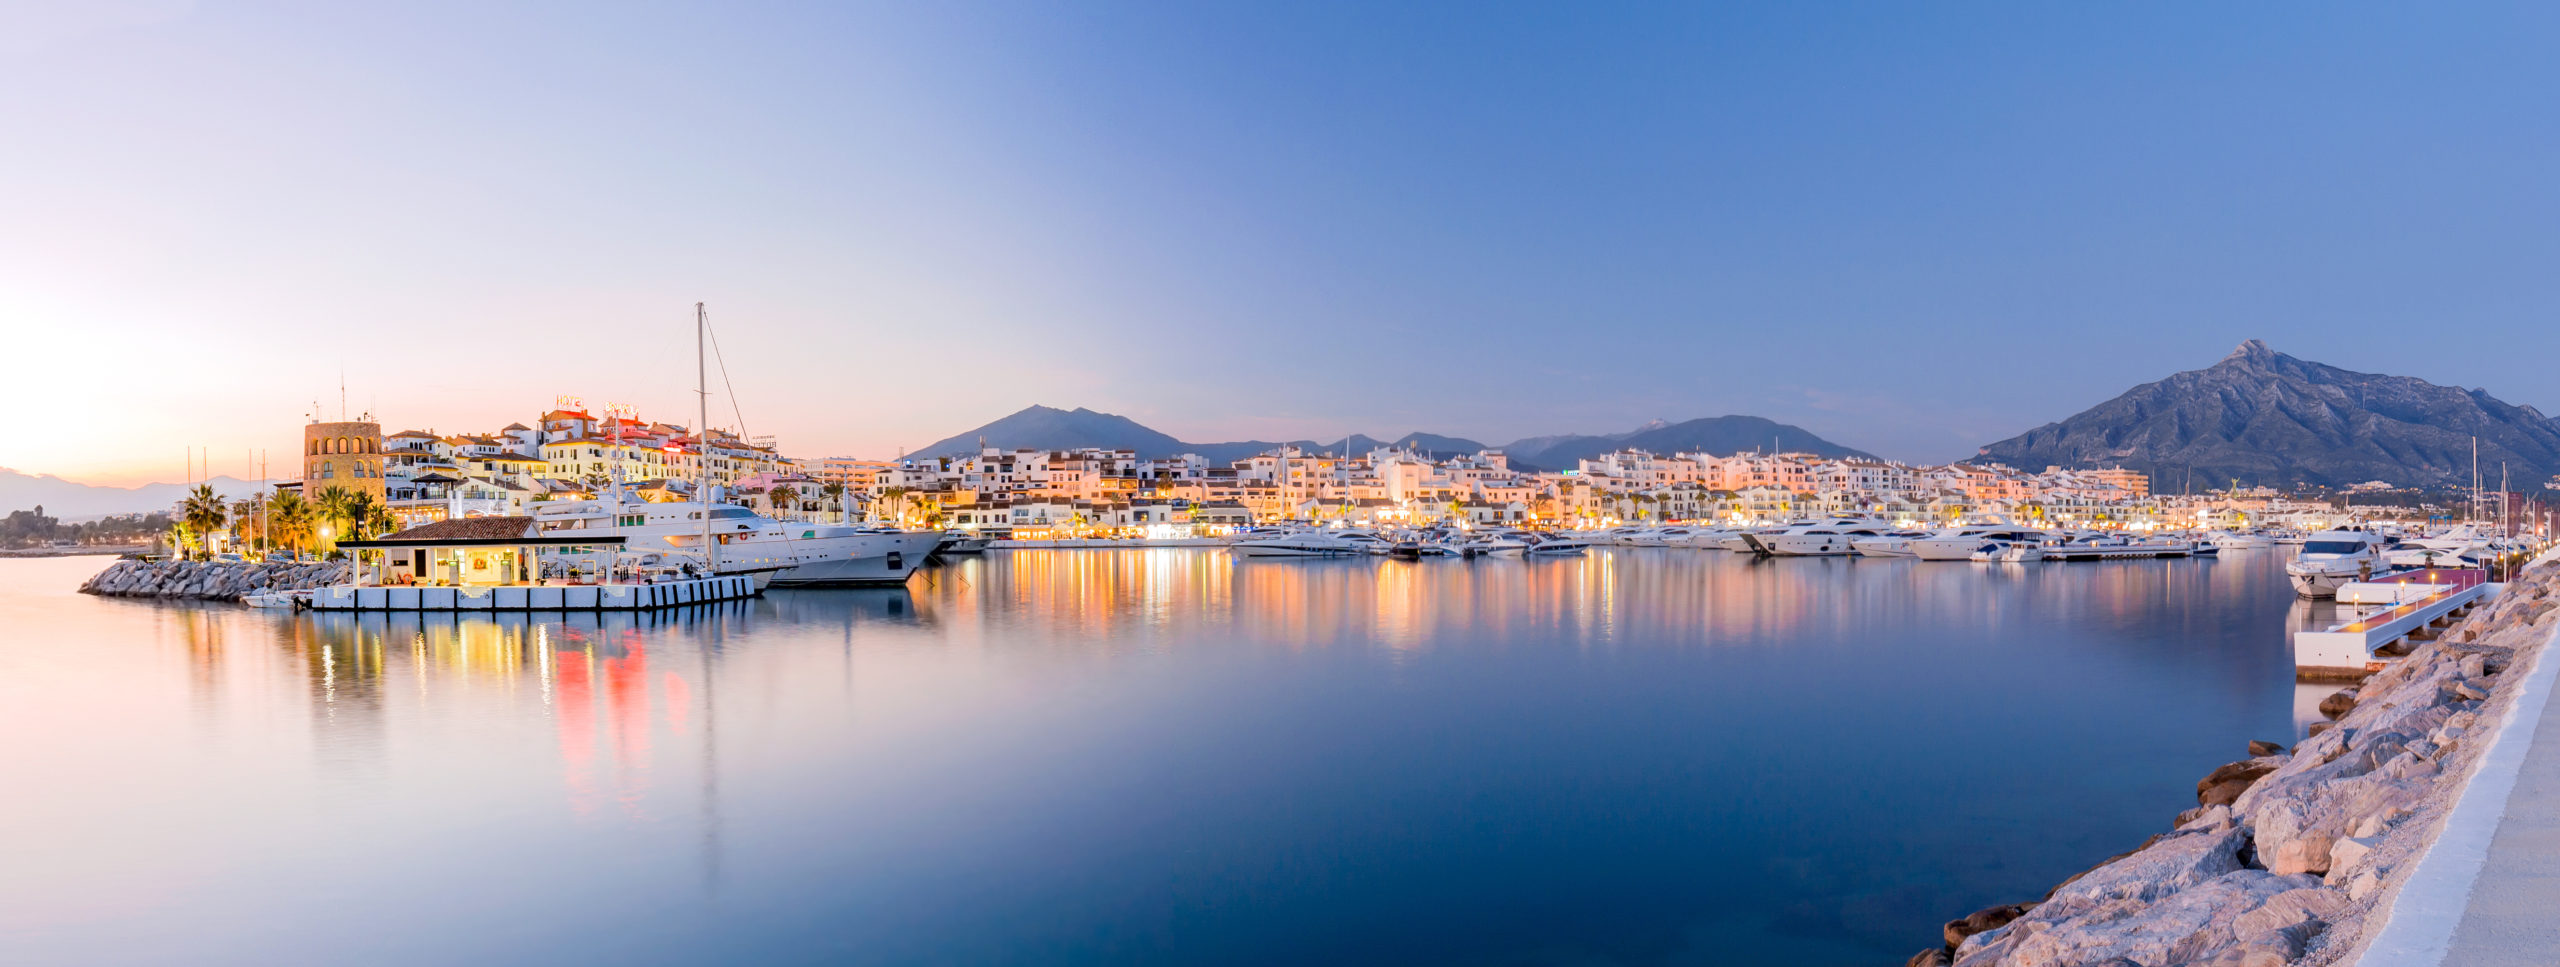 Why purchase a property in Puerto Banus, Marbella